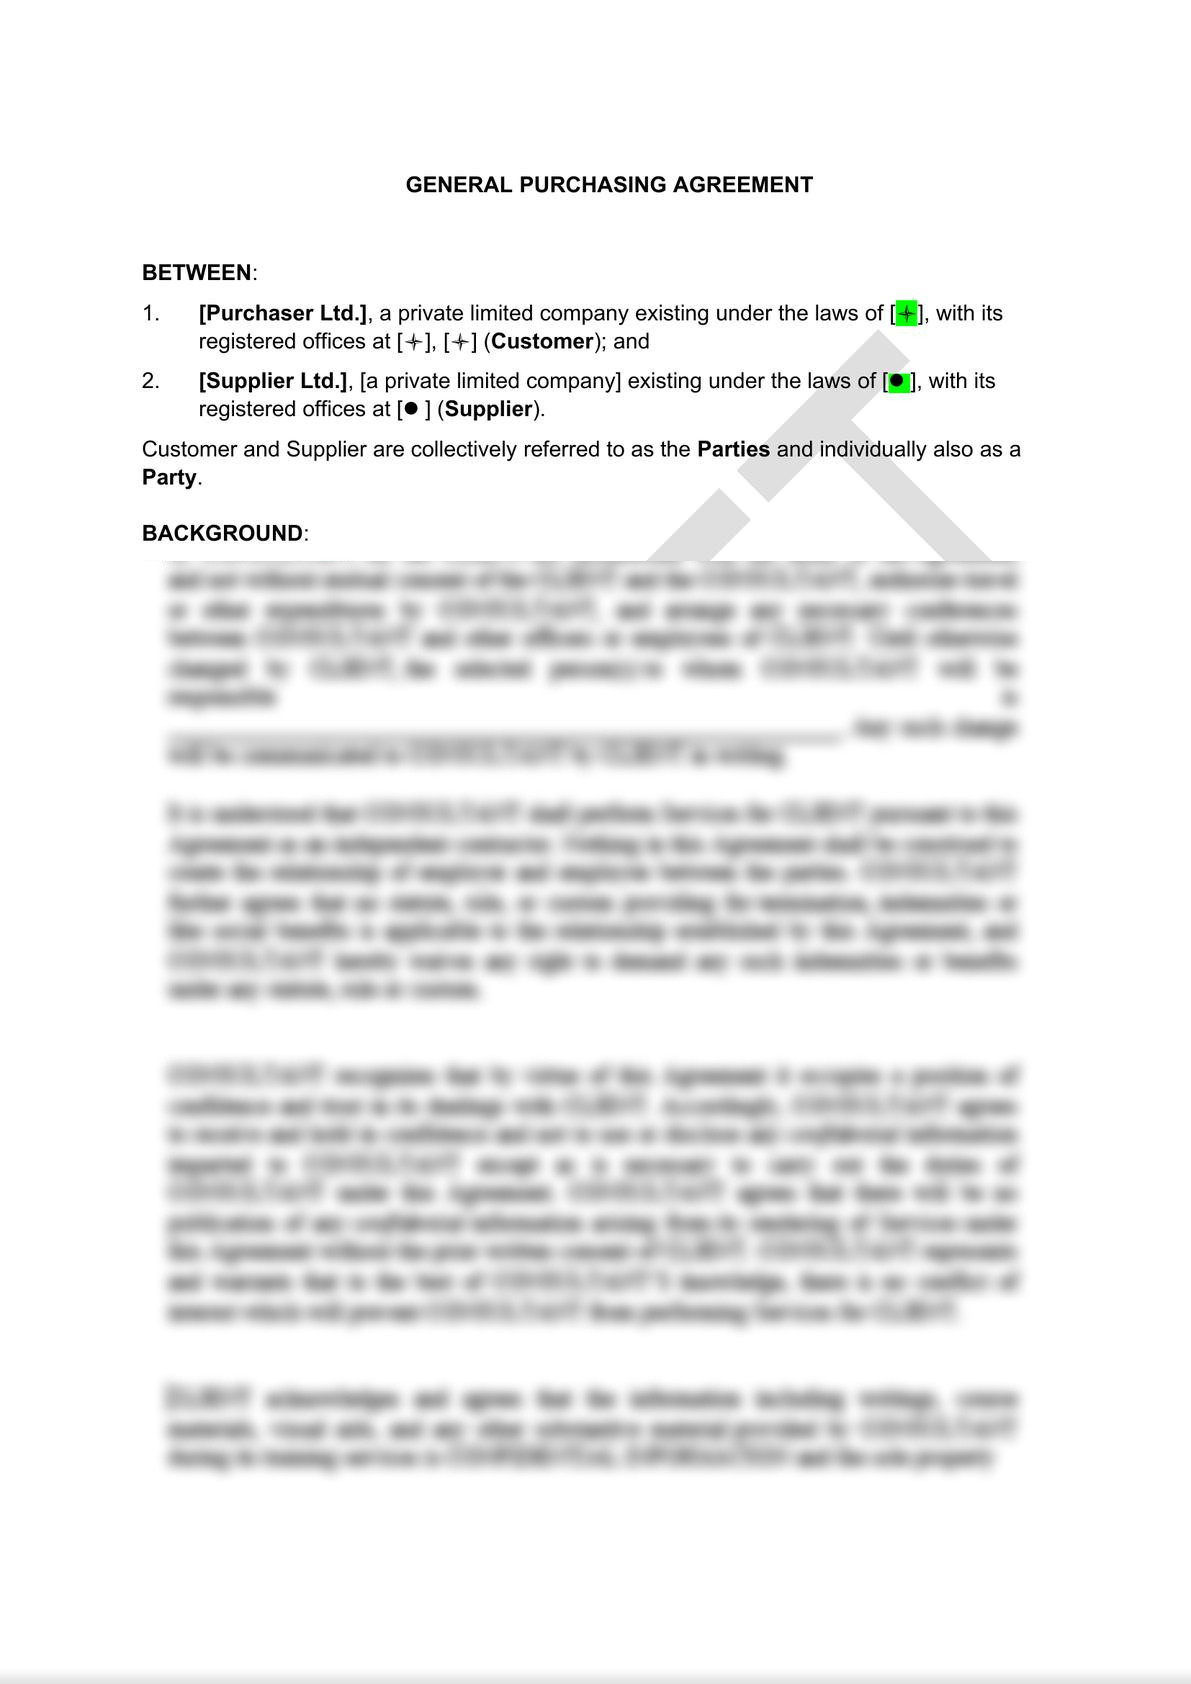 General Purchasing Agreement-5